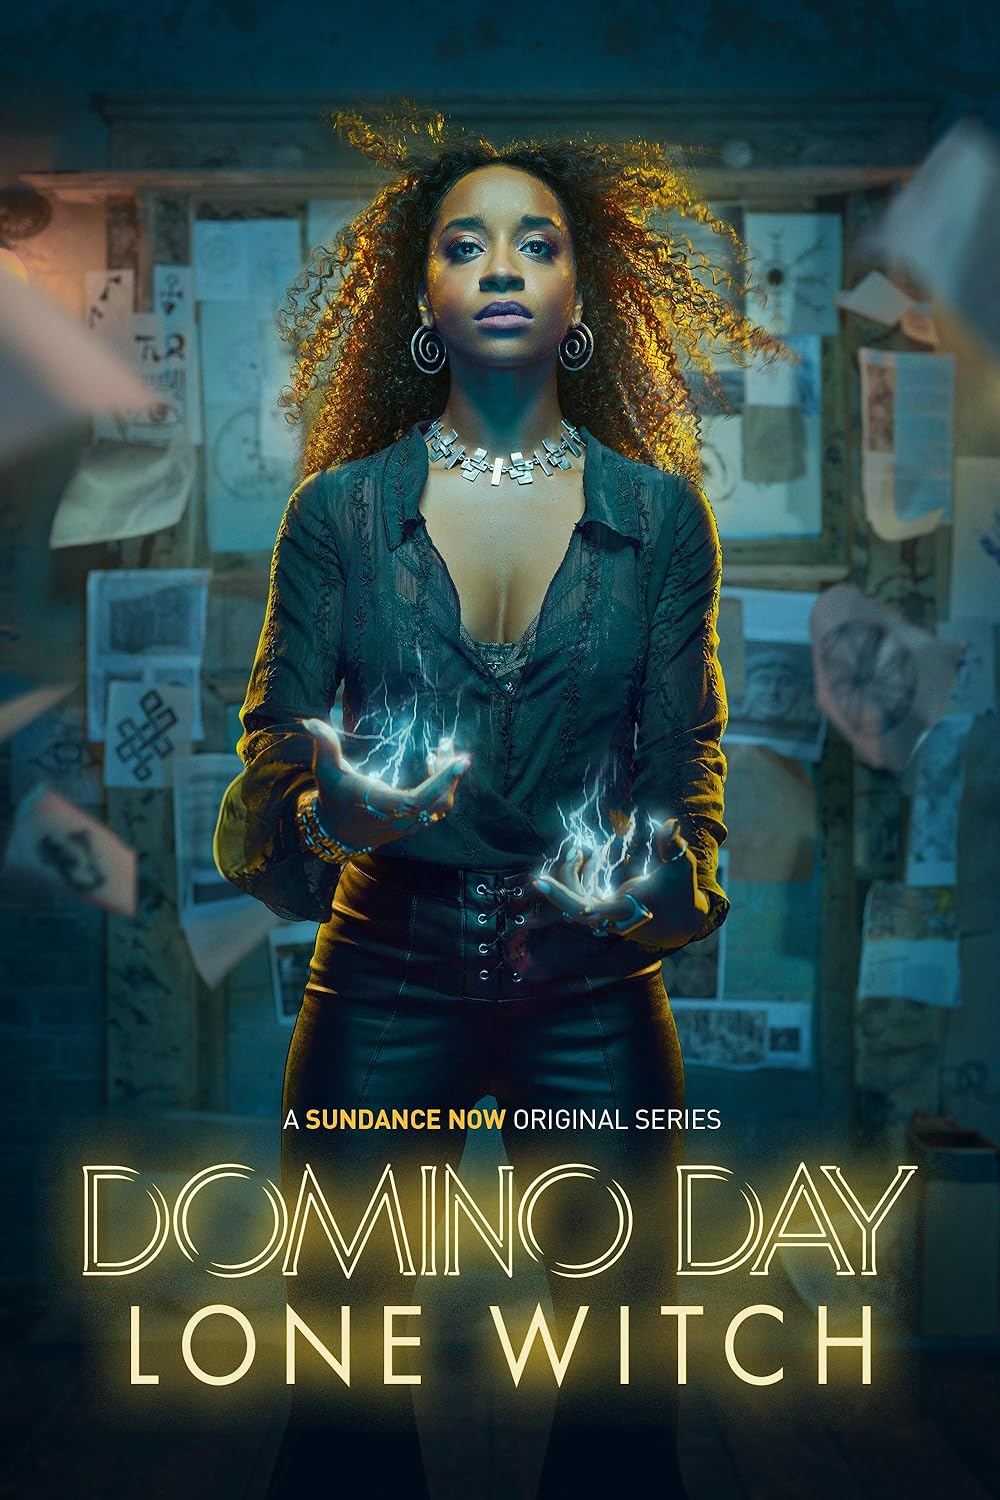 Domino Day: Lone Witch